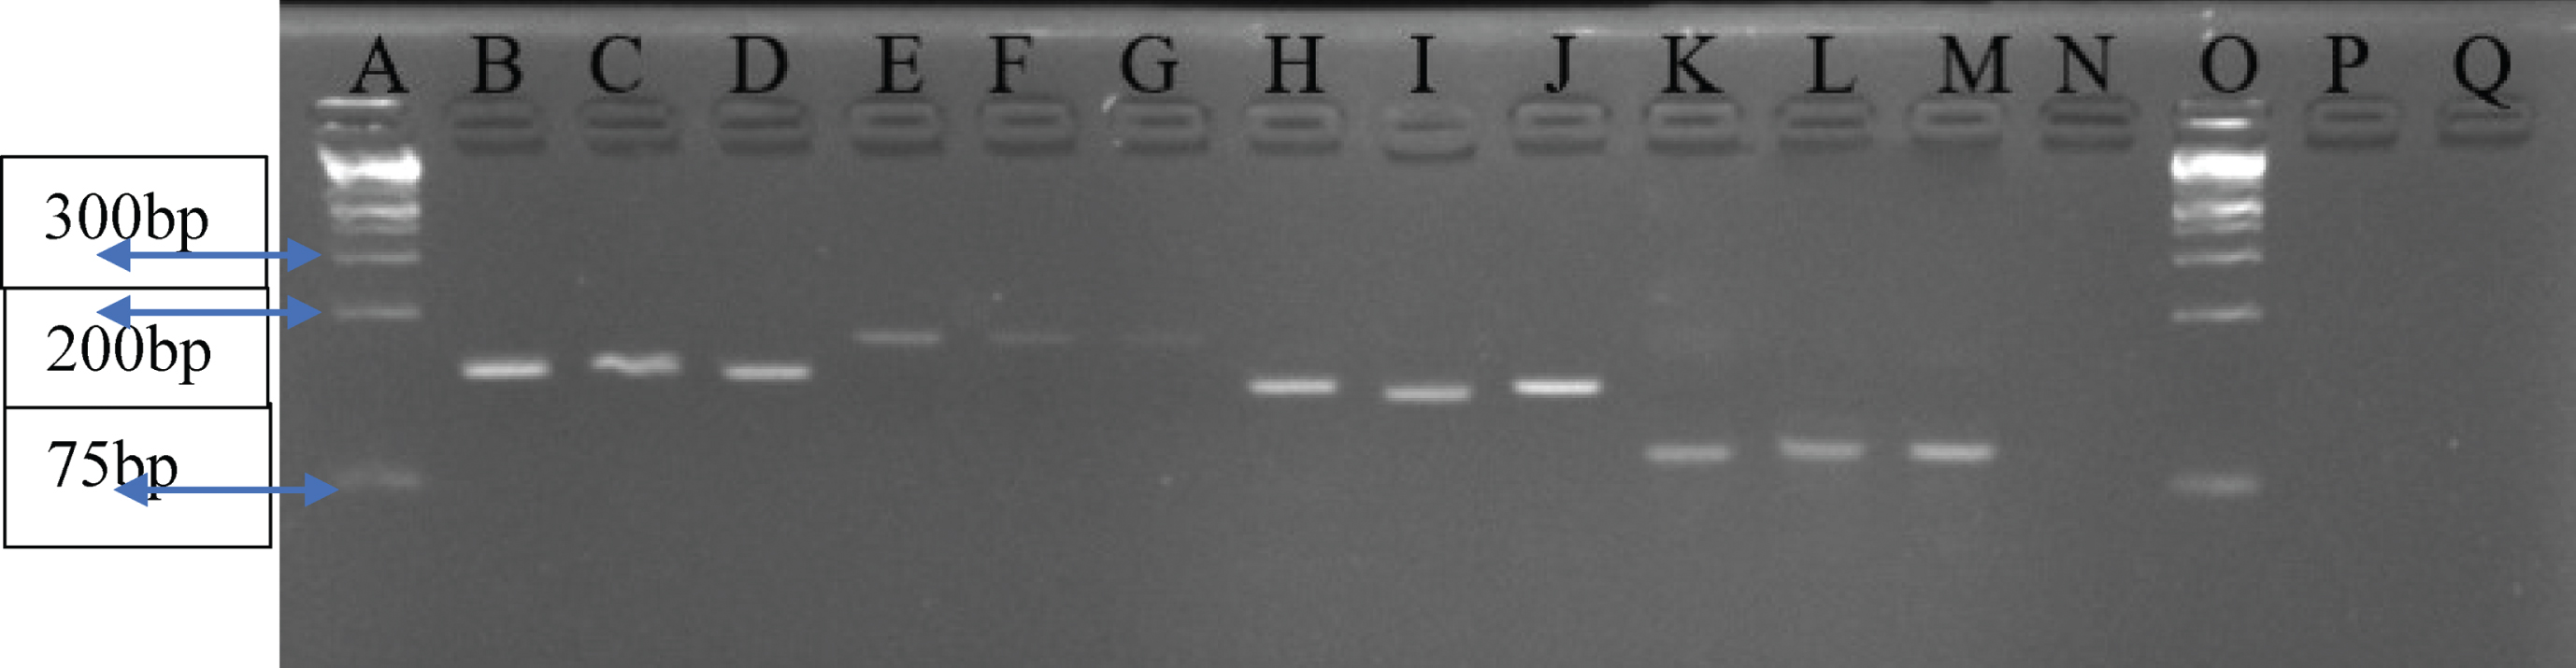 A 4% Agarose gel analysis for selected amplicons of qRT-PCR products per gene. Lane A and O – 1 kb plus Ladder; Lanes B, C, D – GAPDH (139 kb); Lanes E, F, G – CASP9 (172 bp); Lanes H, I, J – CXCR2 (131 bp); Lanes K, L, M – CXCL1 (90 bp); N – Negative control.